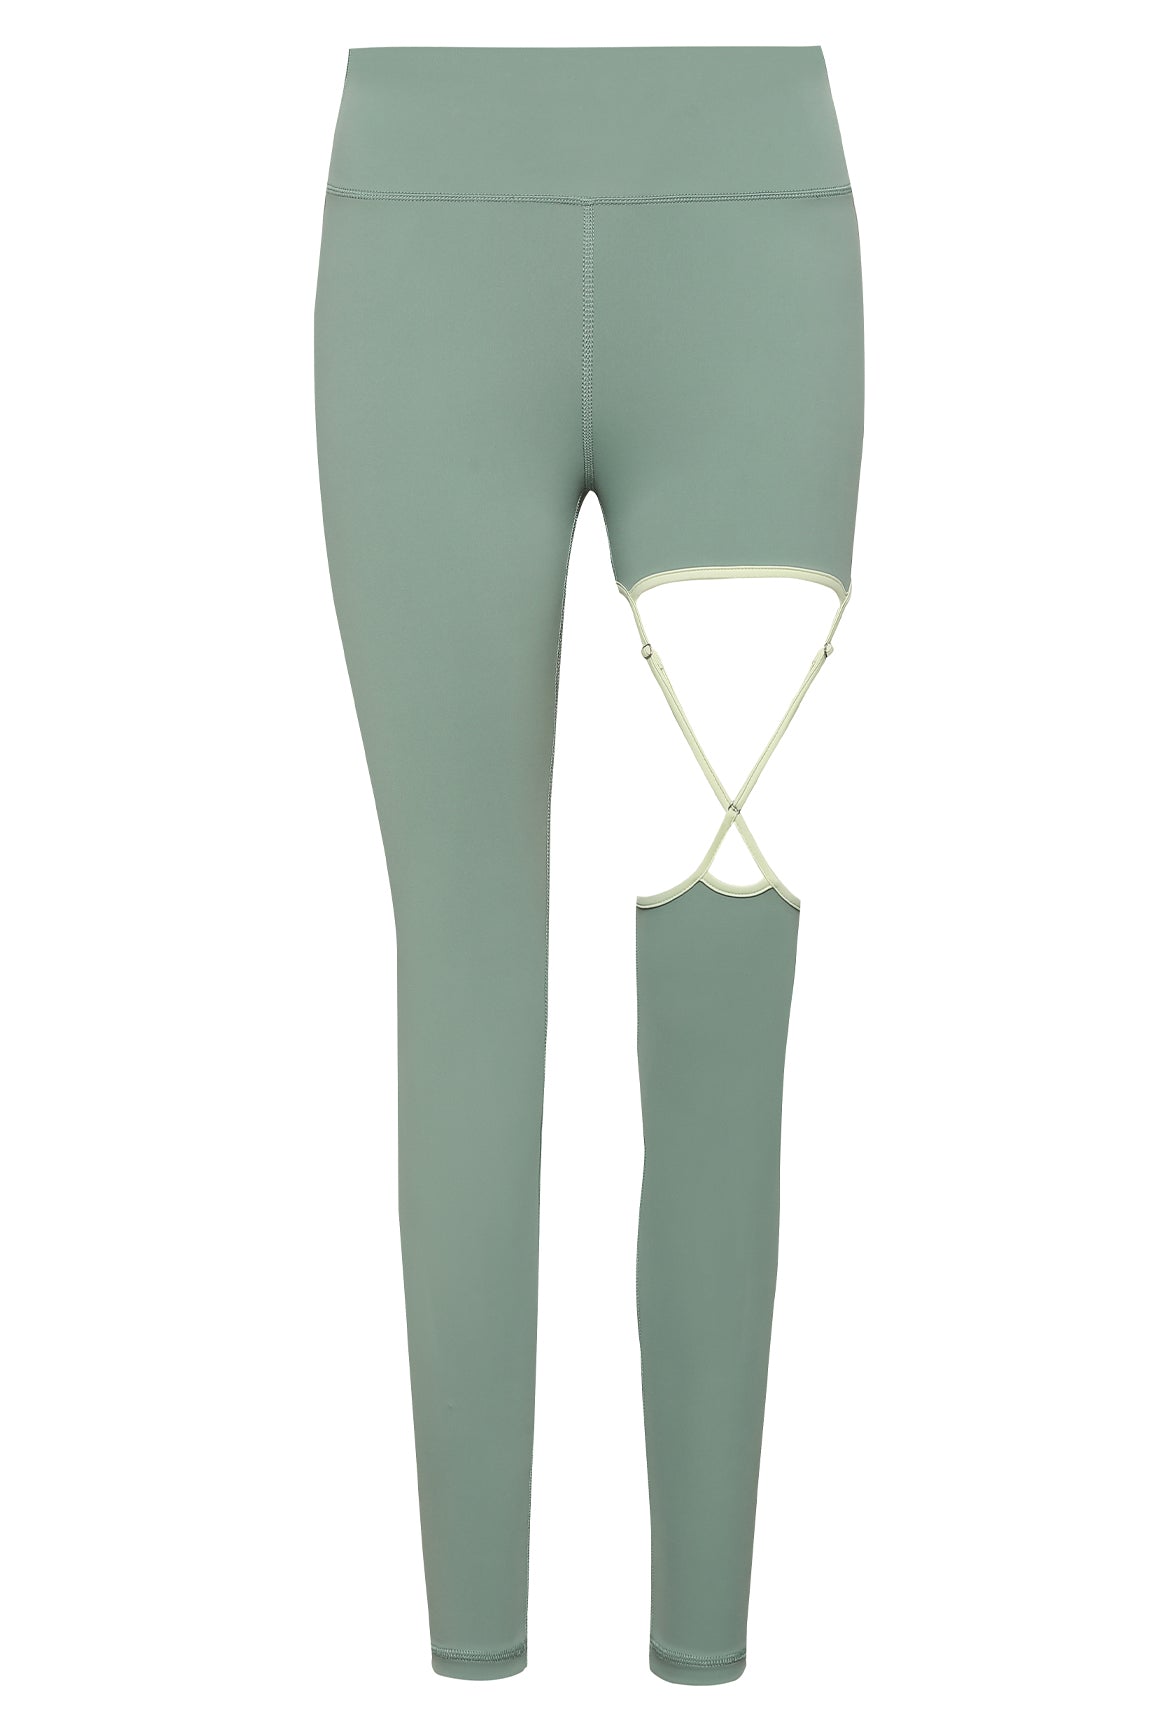 Turquoise High-Waist Strappy Hollow Out Leggings – Laquila Activewear